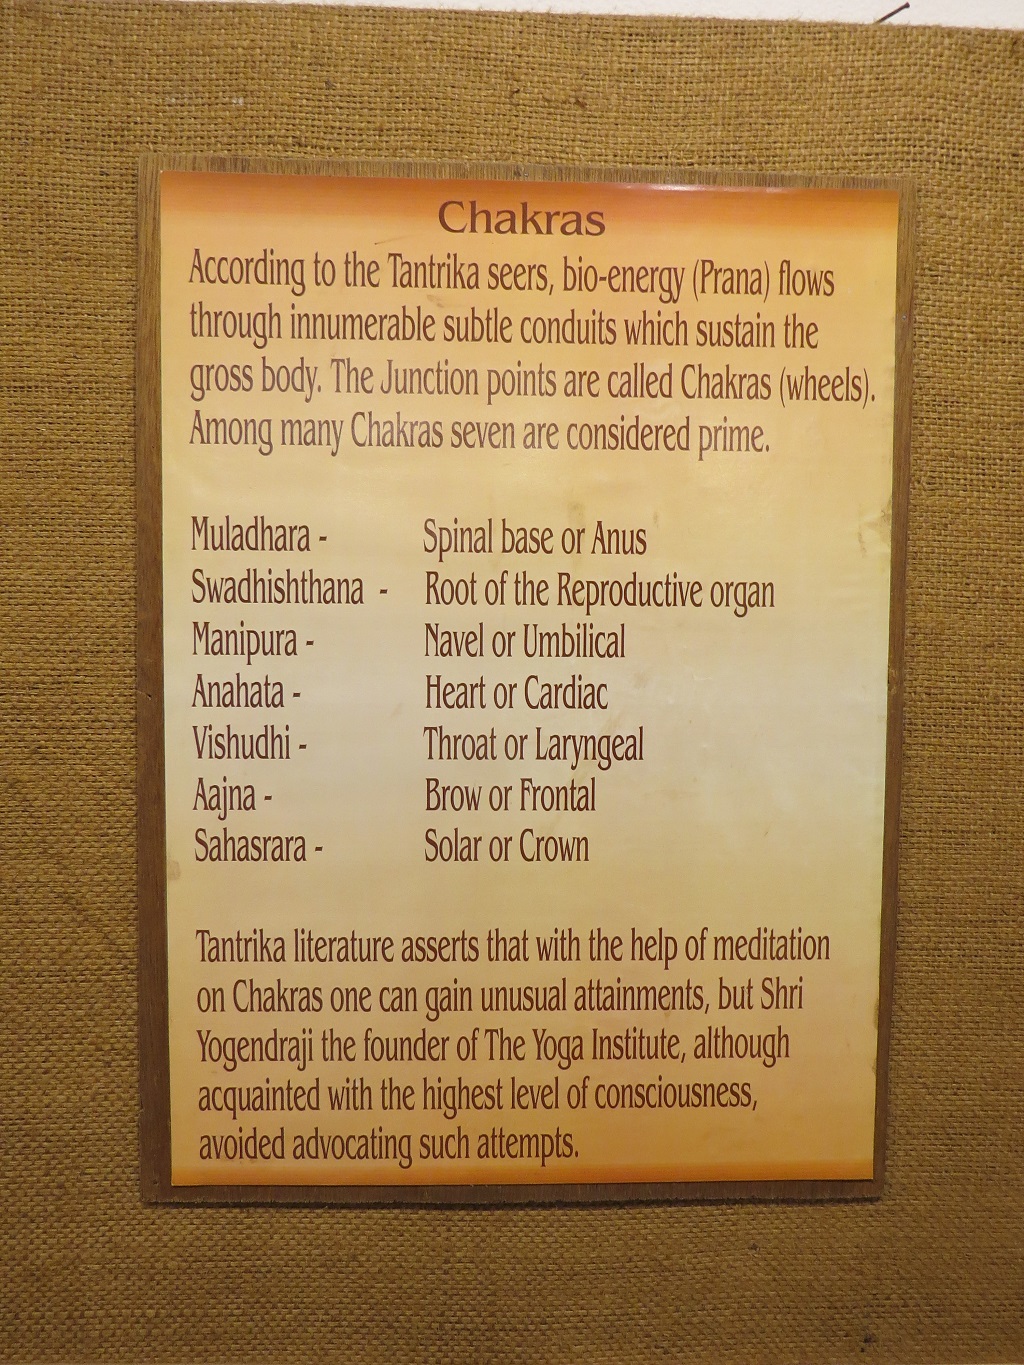 What are the Seven Prime Levels of Chakras?